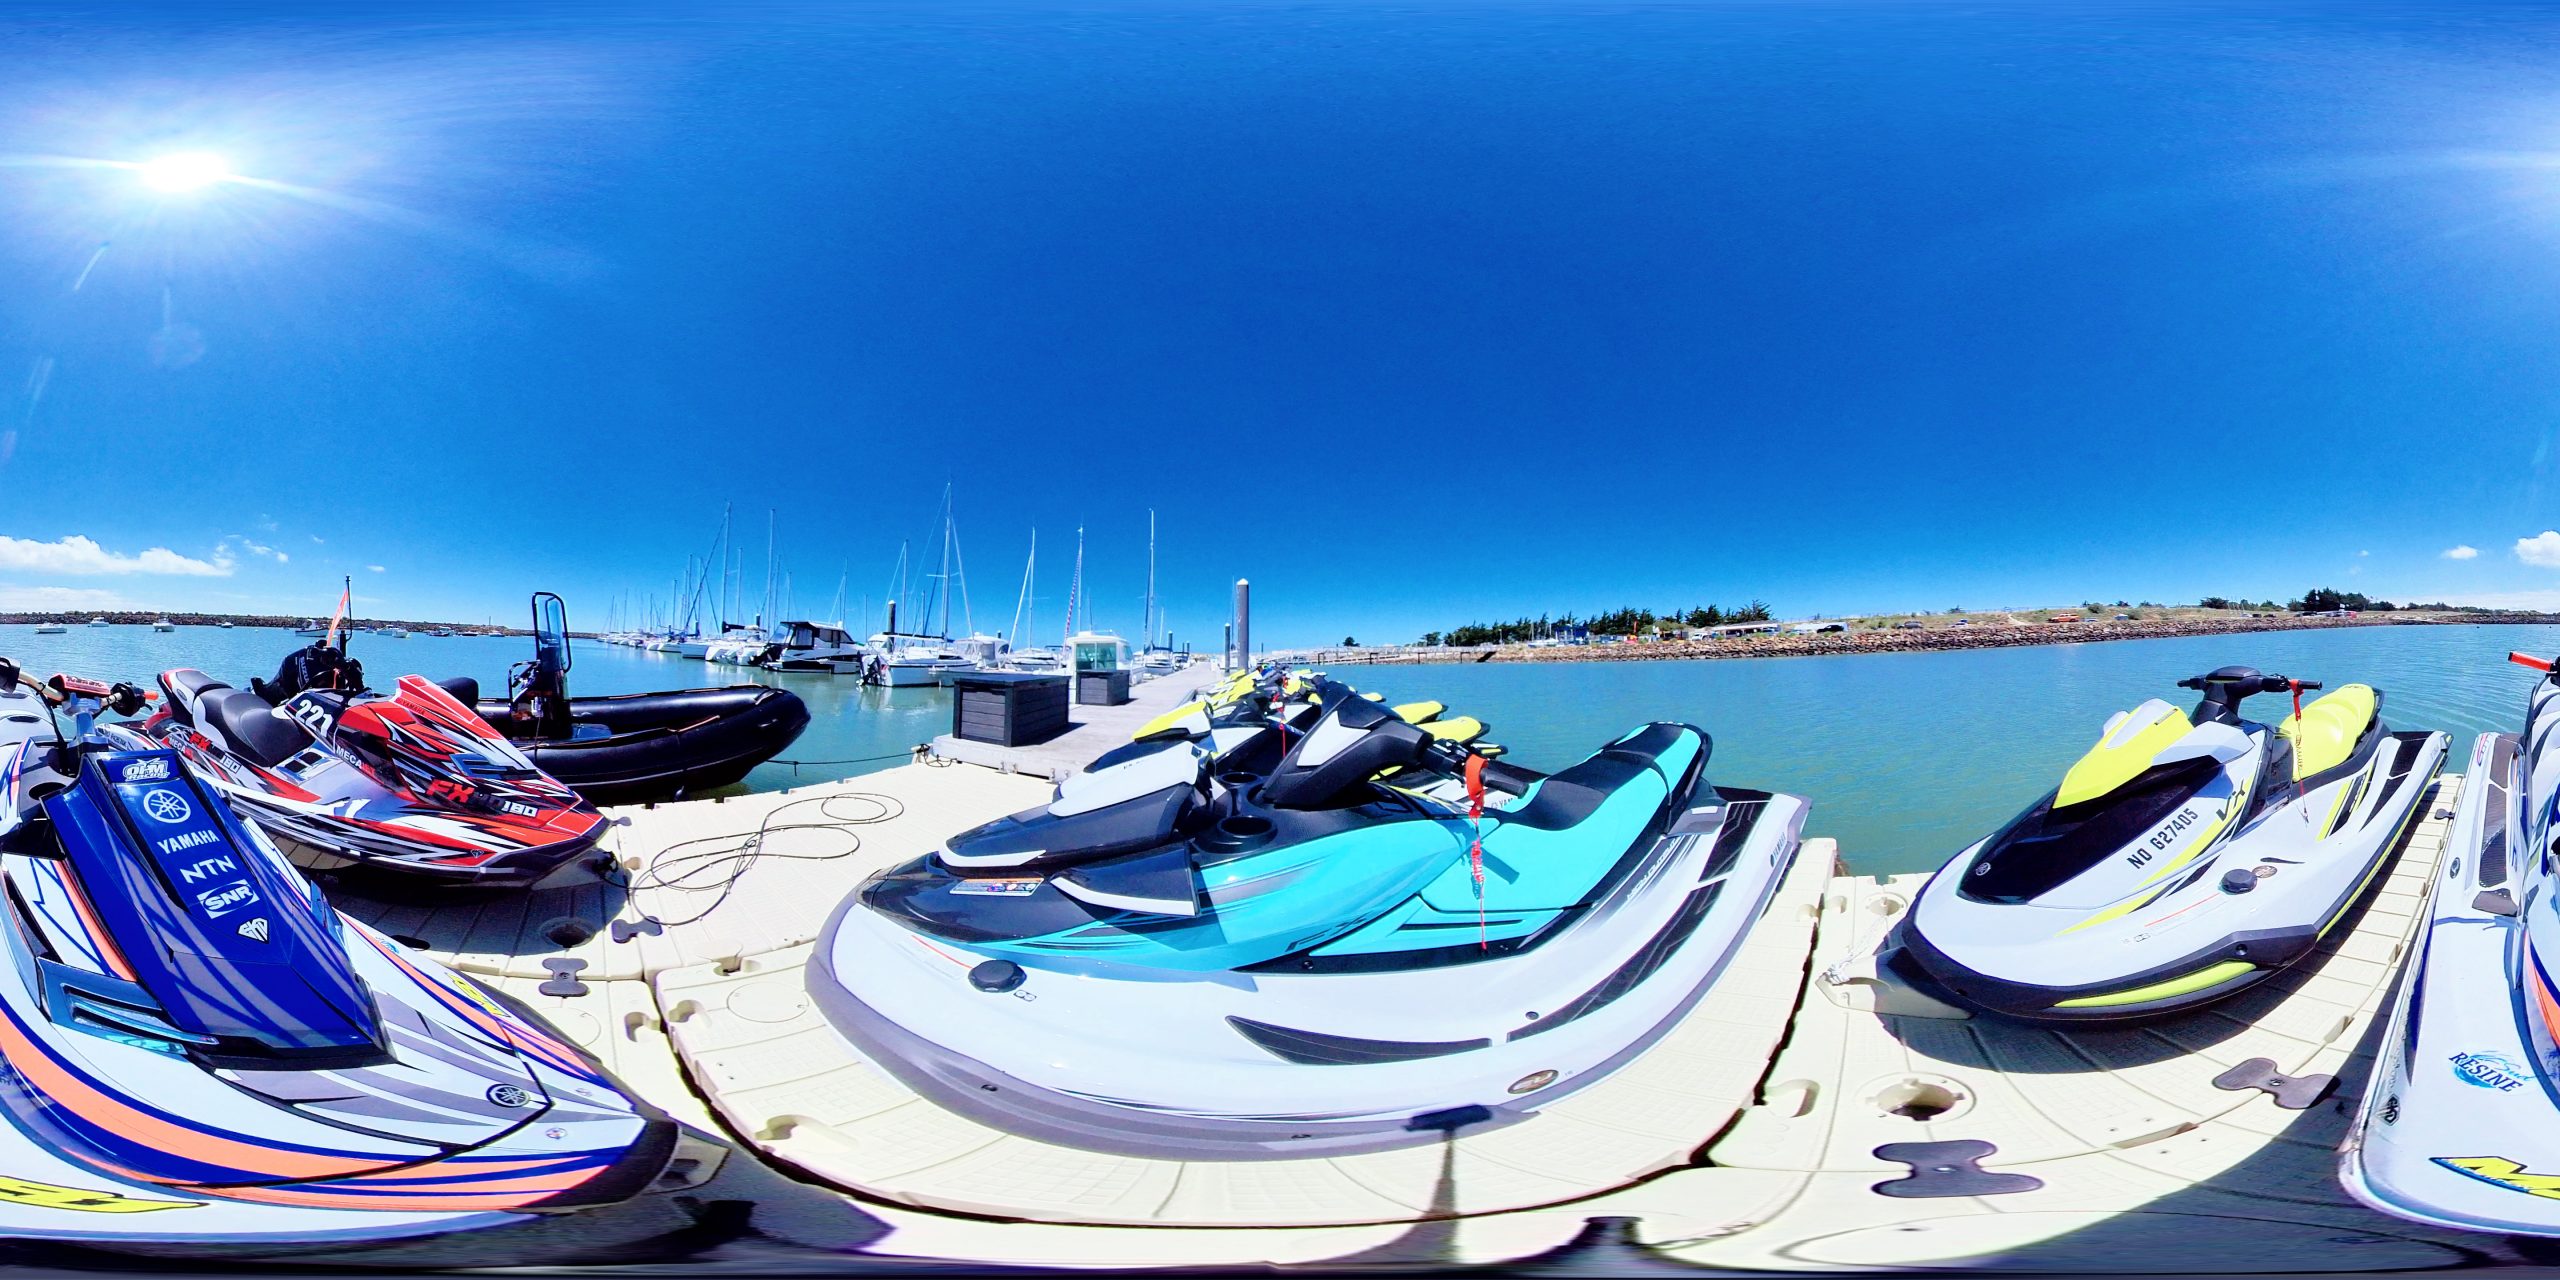 360 view of the Pontoon